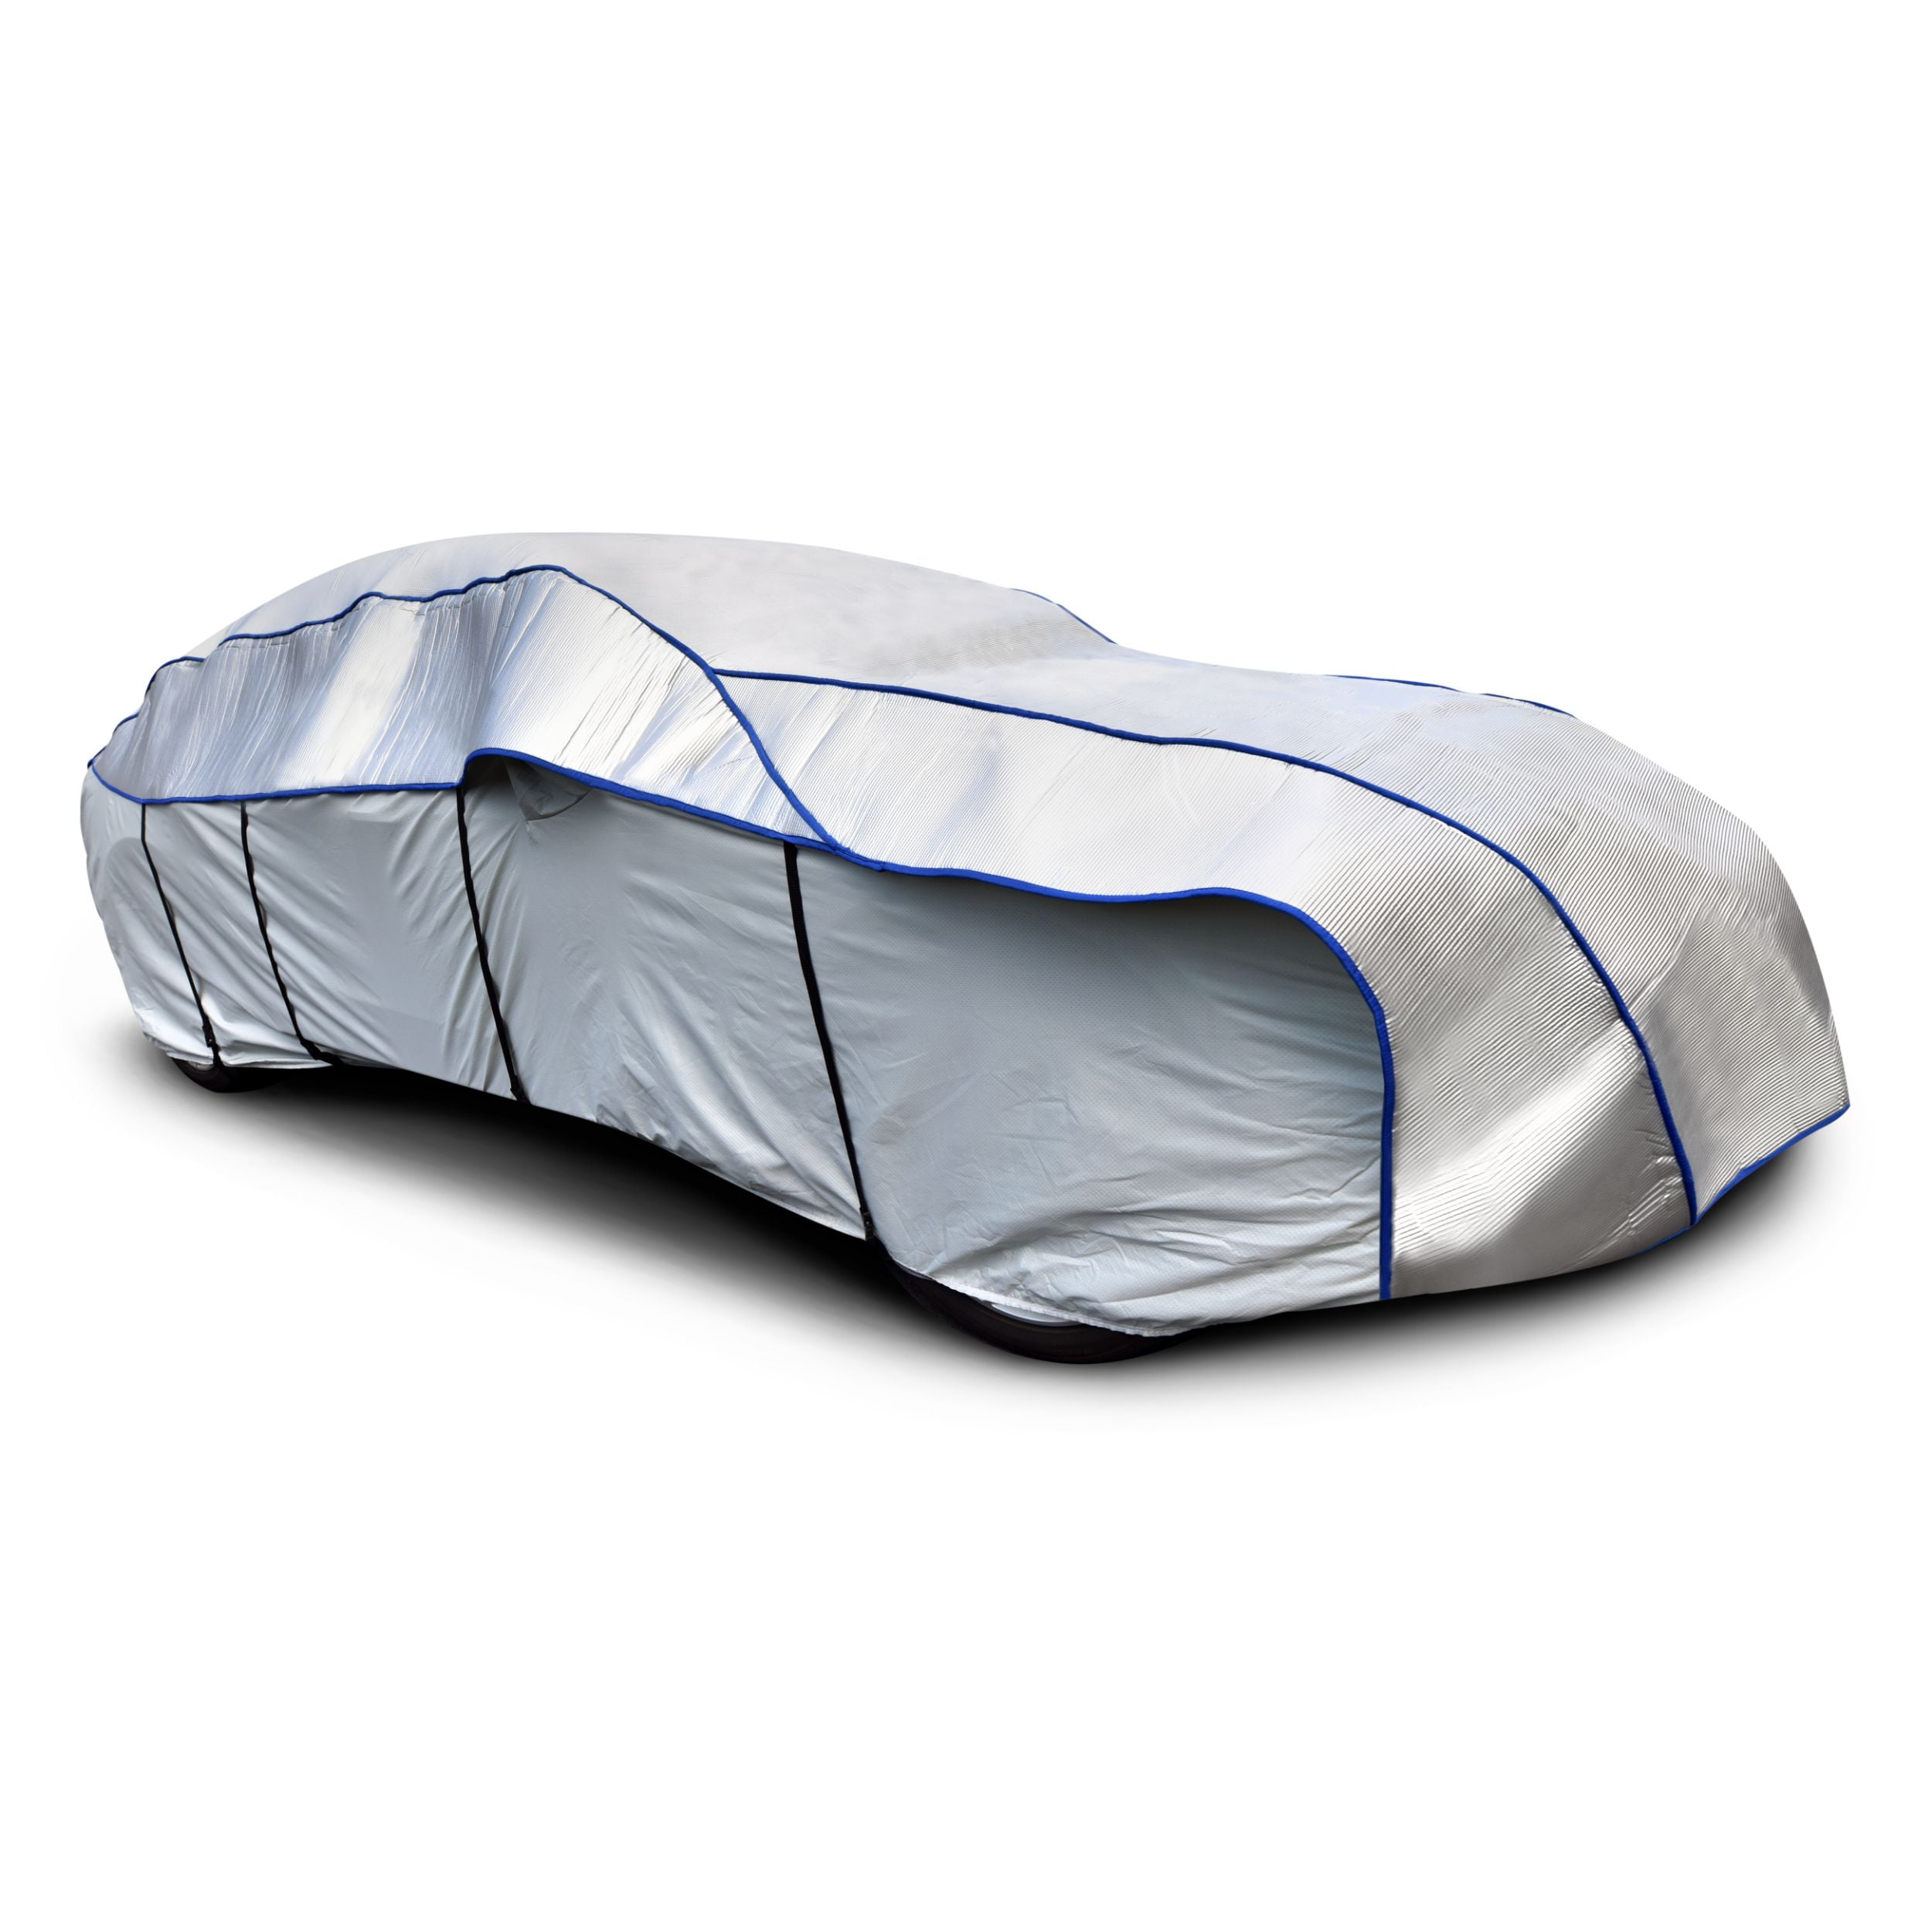 Car hail protection cover Perma Protect size M, Hail protection covers, Covers & Garages